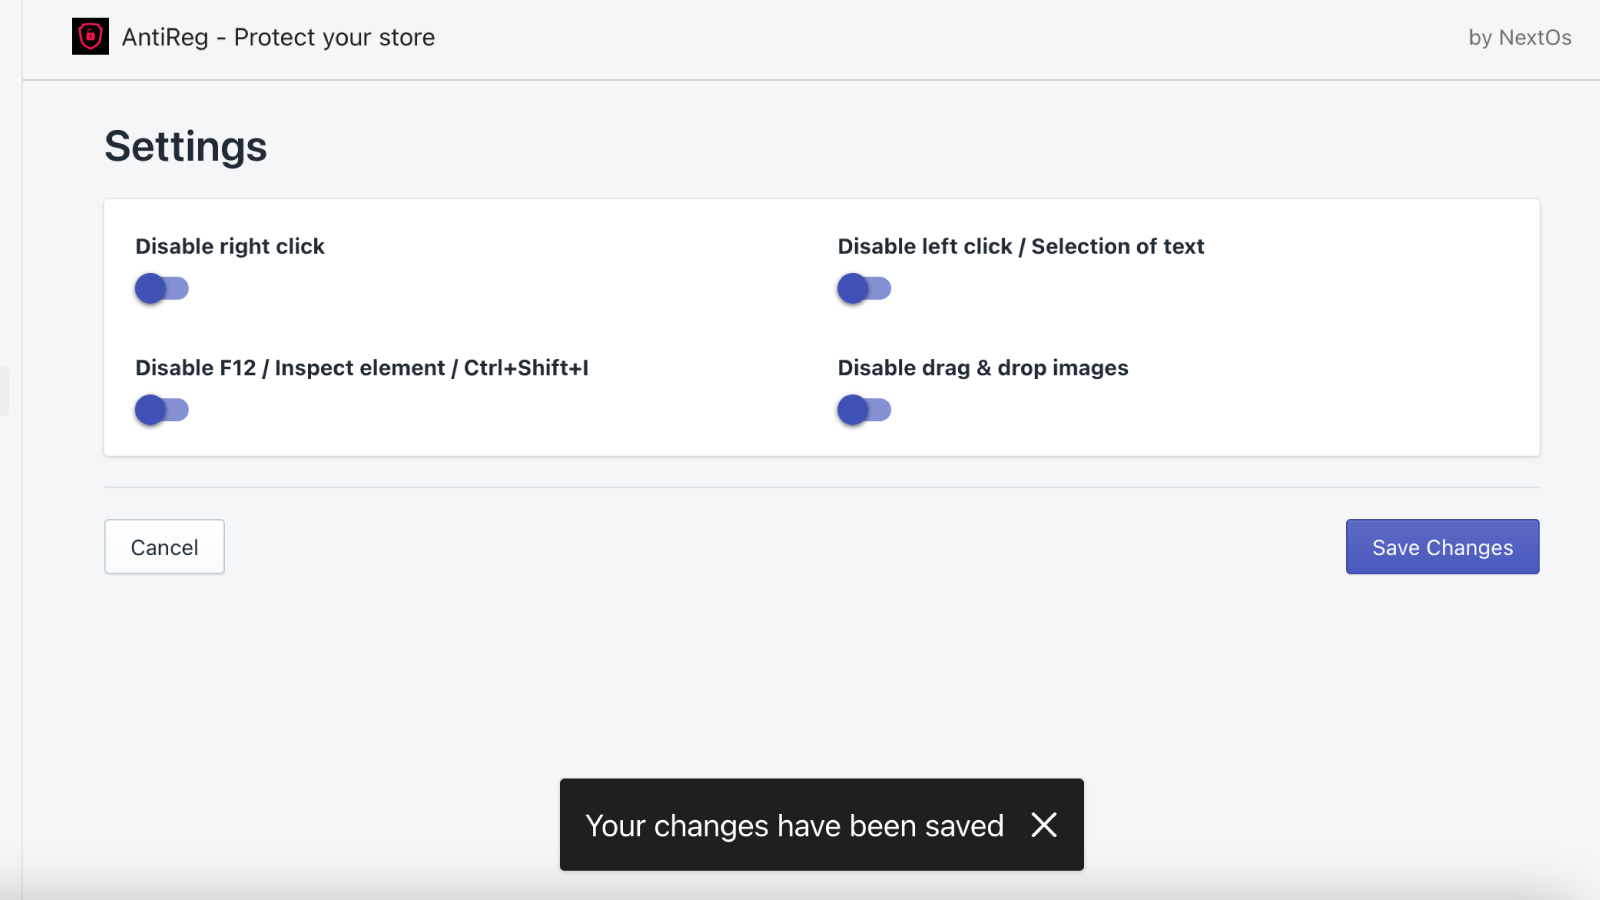 Anti Theft - Select actions you want to disable in your store